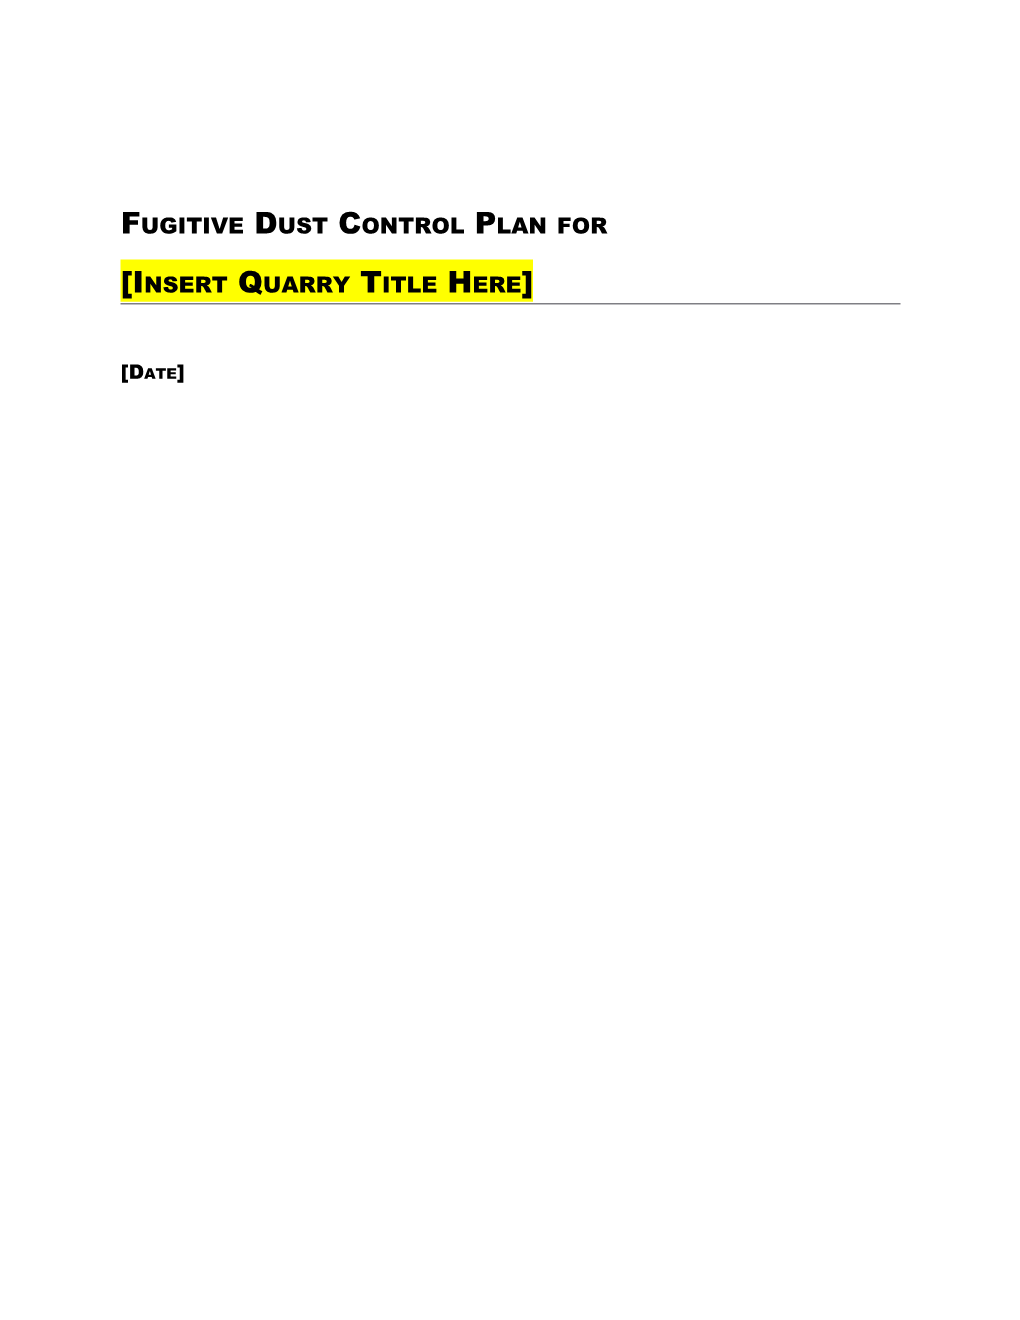 Fugitive Dust Control Plan For